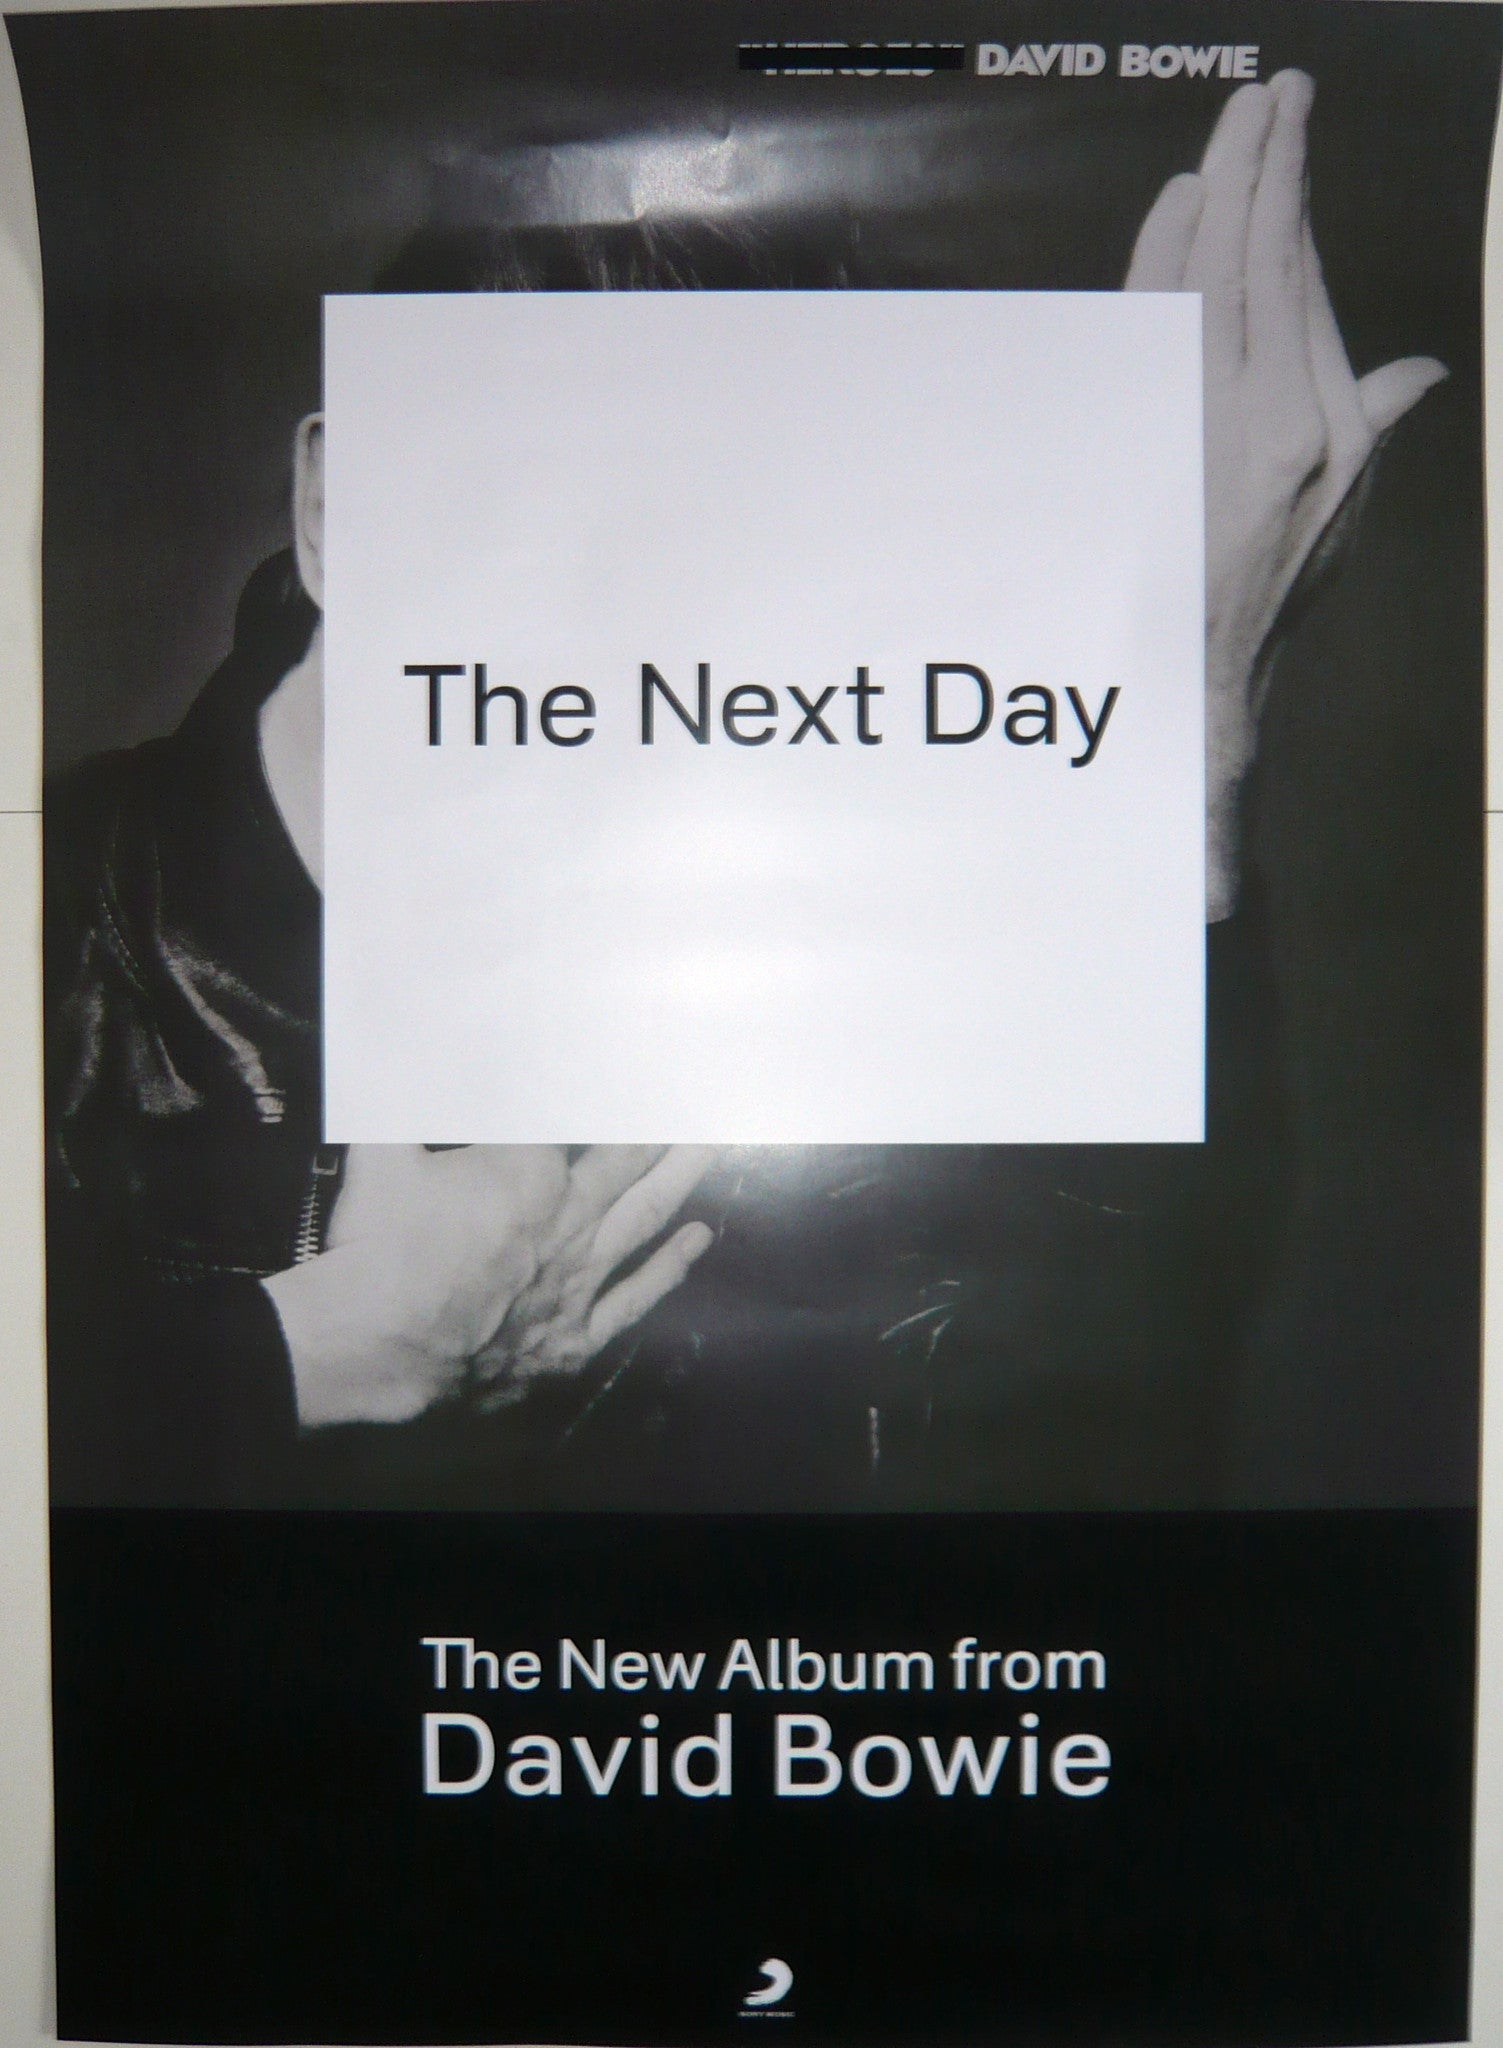 Bowie, David - Next Day - Poster.